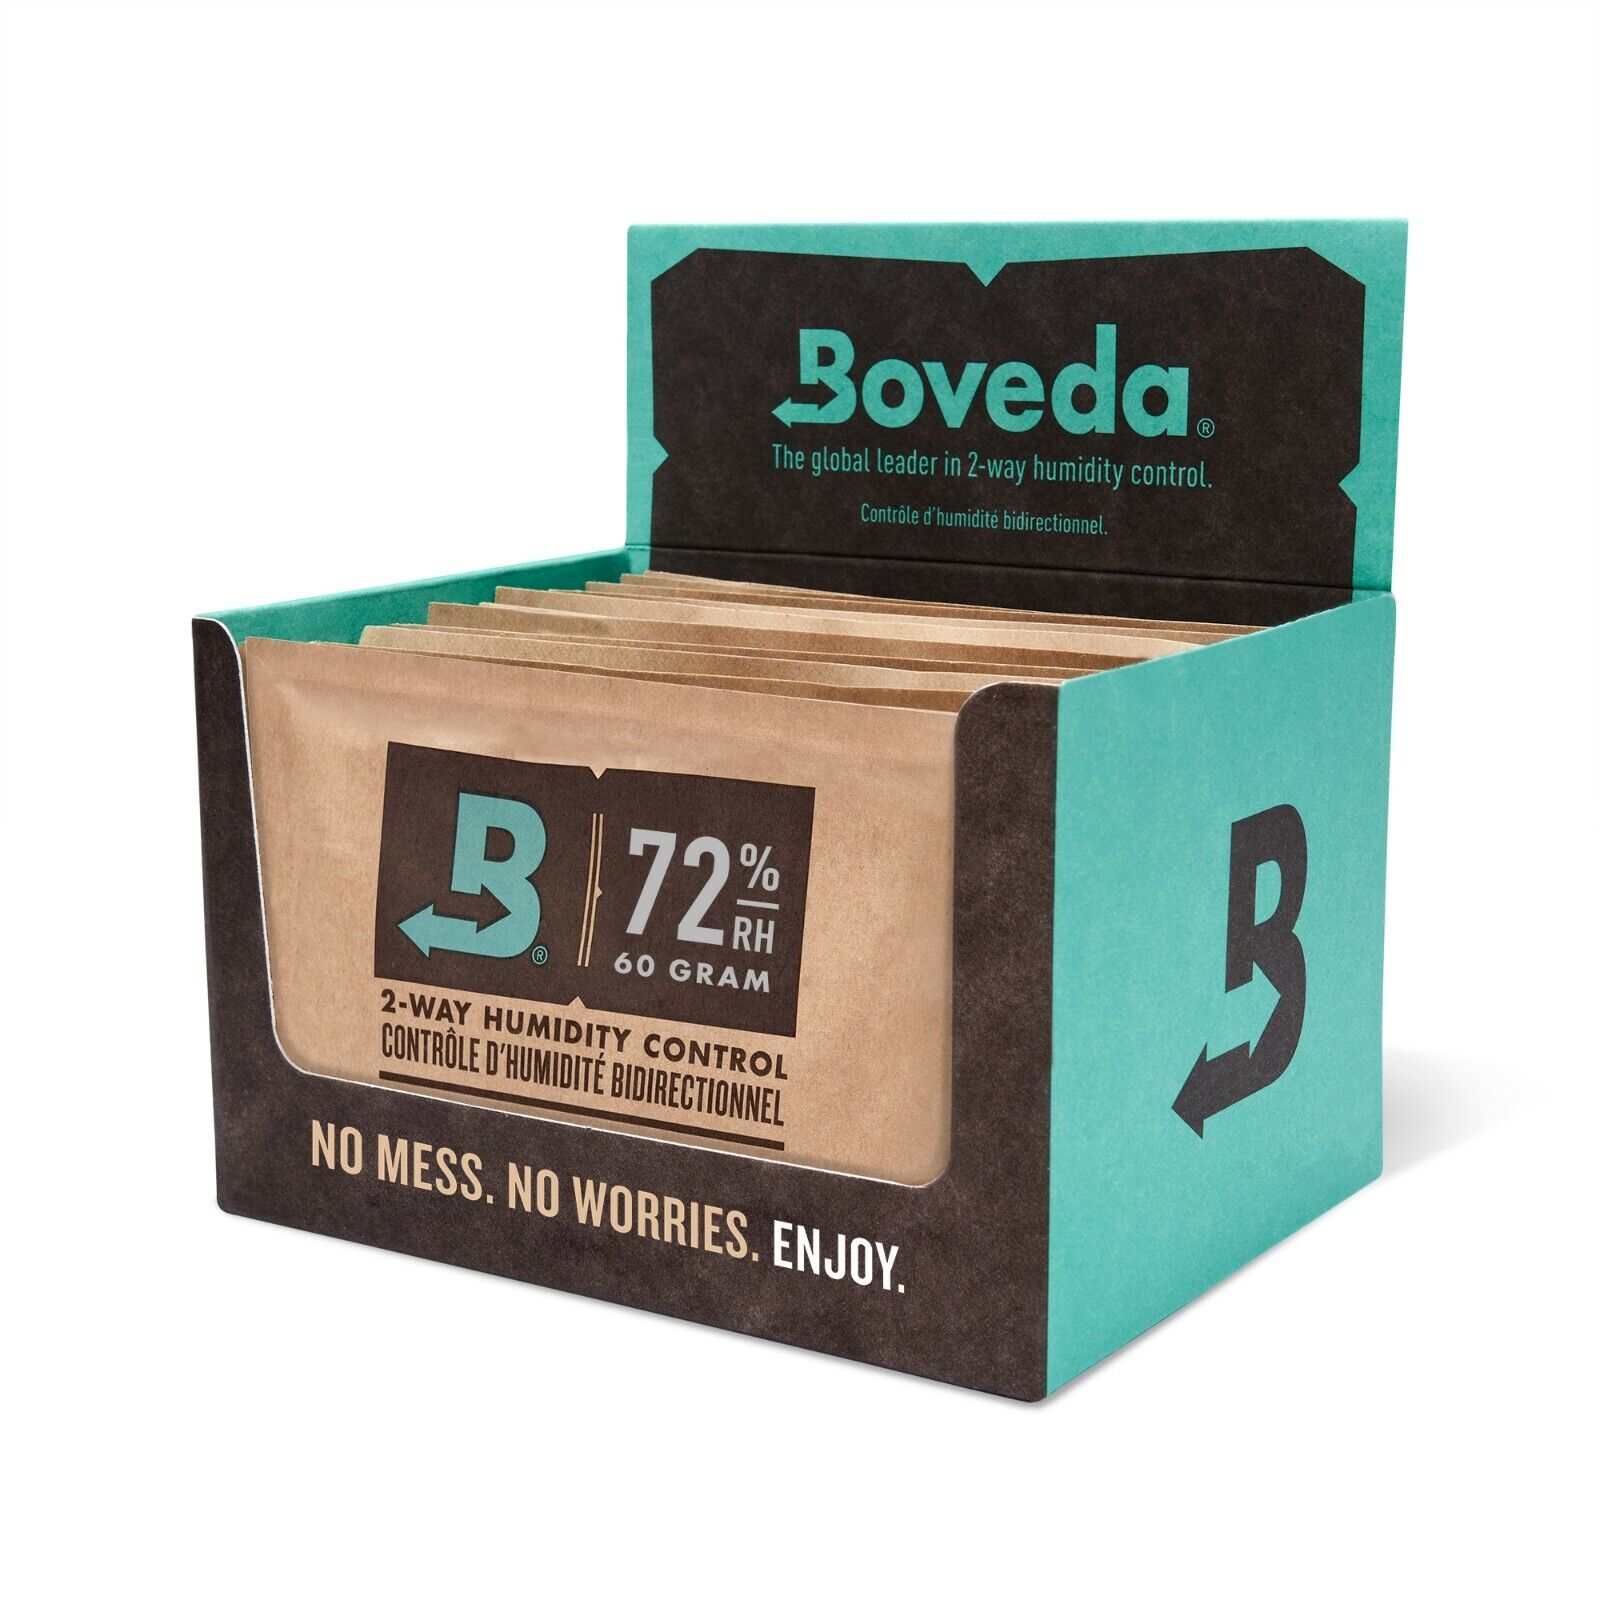 Boveda 72% RH 2-Way Humidity Control - Protects & Restores - Size 60 - 12 Count